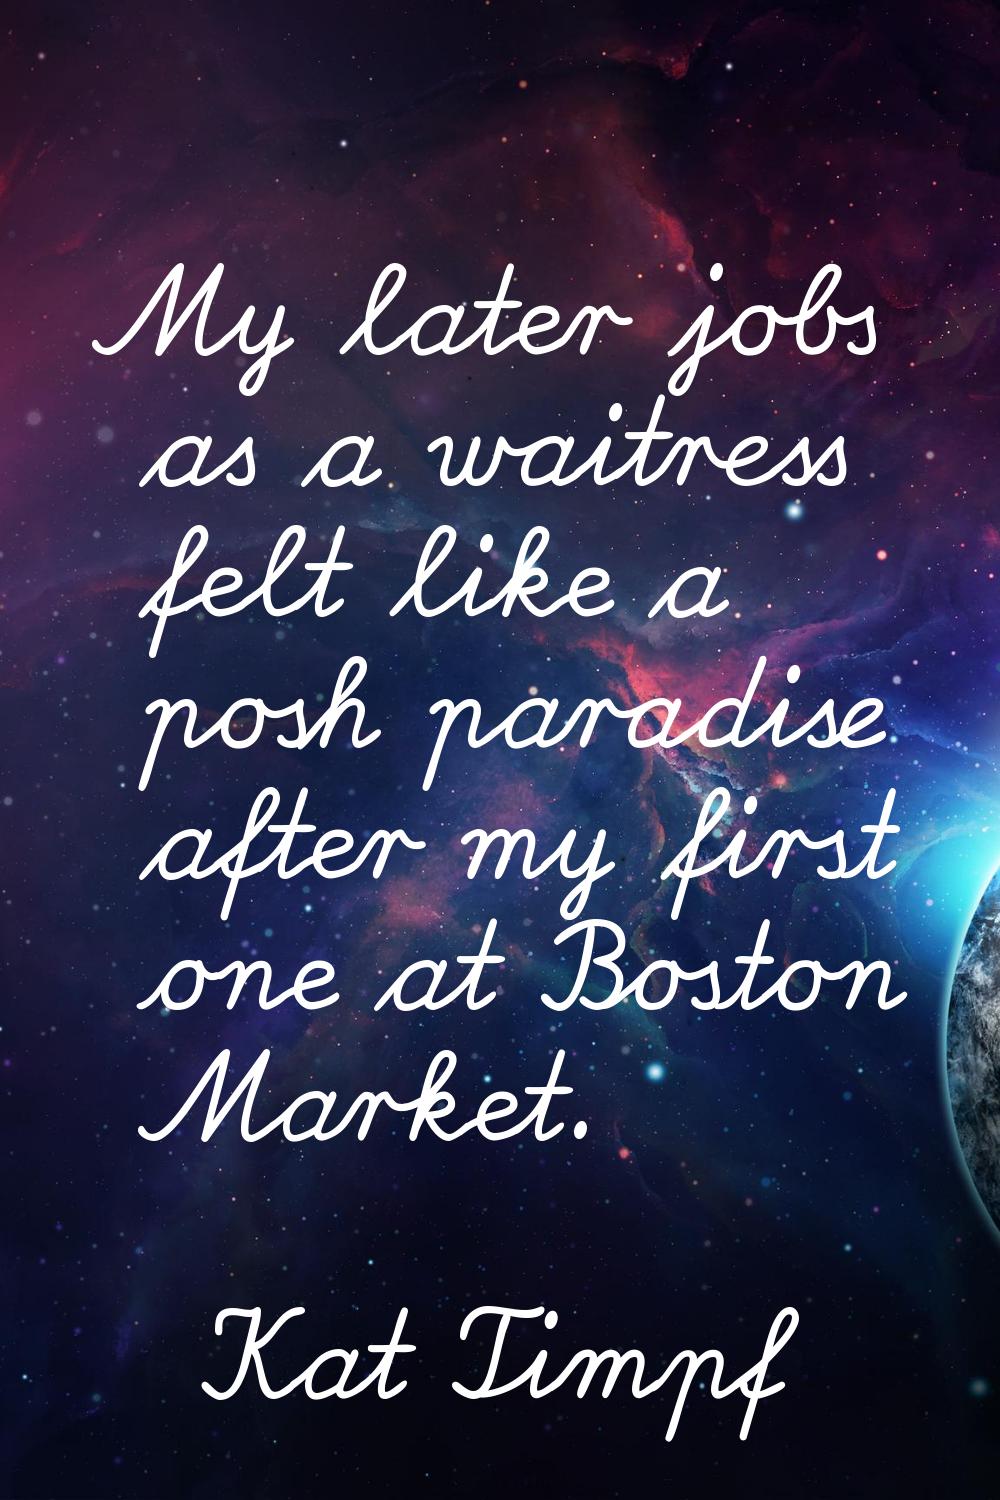 My later jobs as a waitress felt like a posh paradise after my first one at Boston Market.